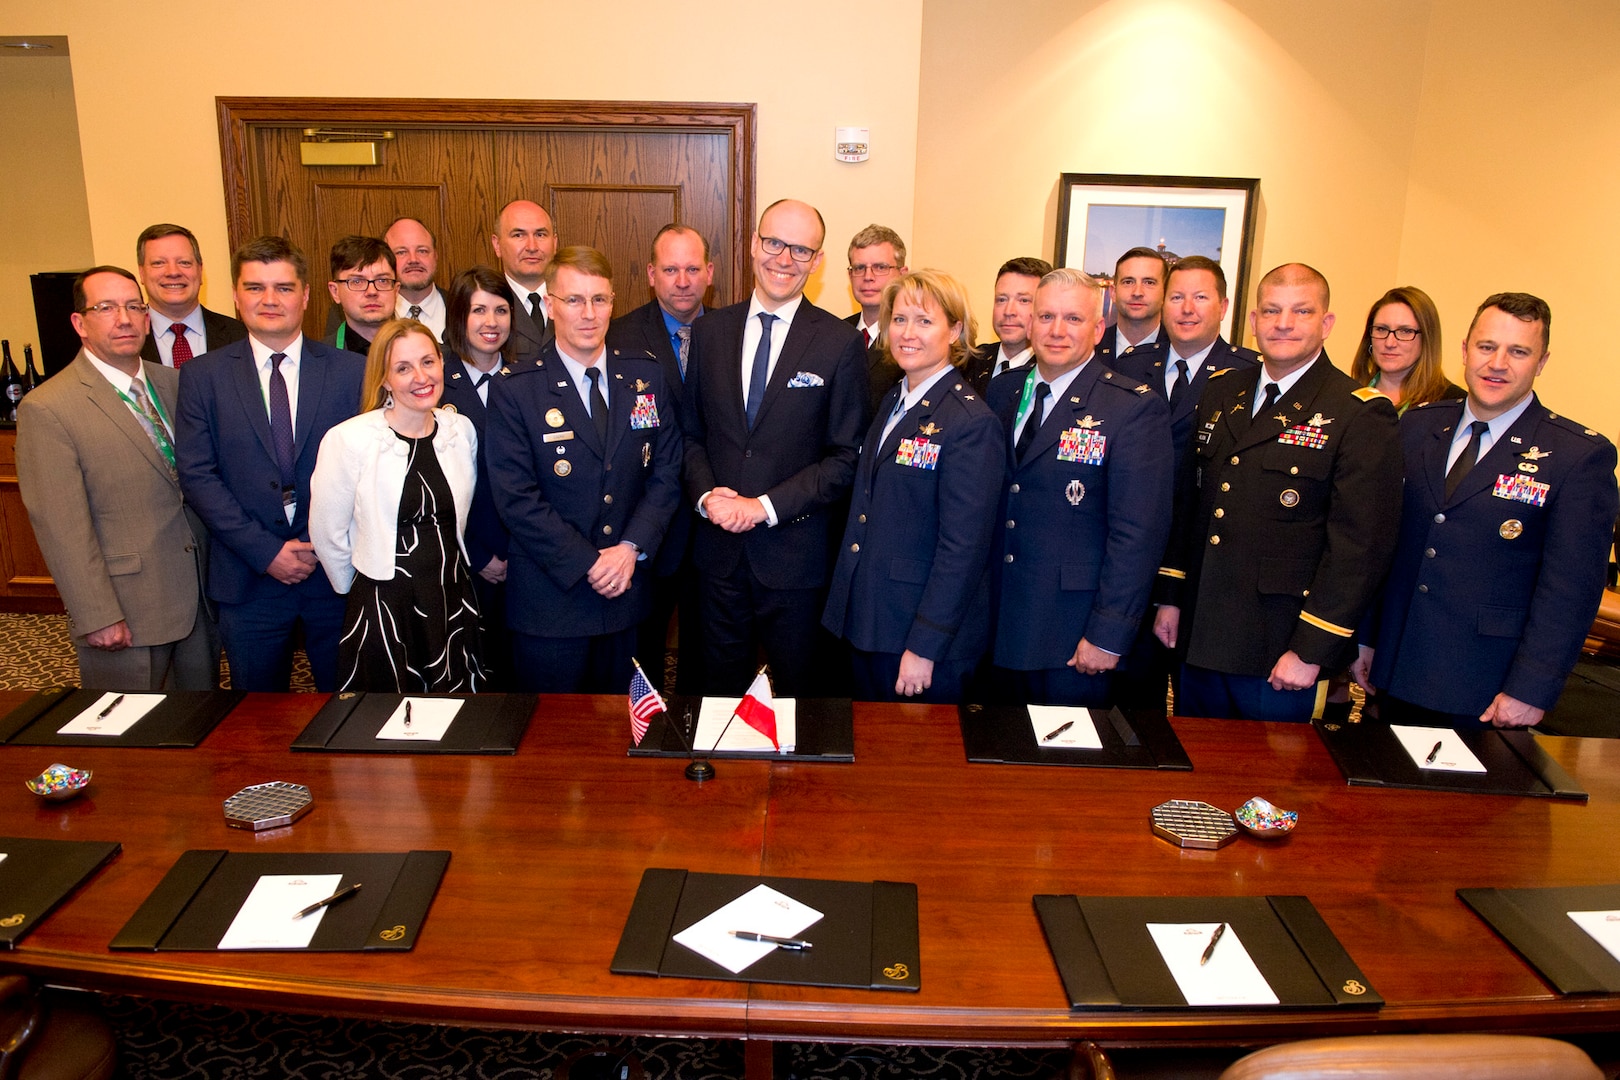 U.S. Space representatives within the Department of Defense pose for a group photo with Michal Szaniawski, acting president of the Polish Space Agency, following the signing of an agreement for space situational awareness (SSA) services and data at the 35th Space Symposium in Colorado Springs, Colo., April 10, 2019. Szaniawski signed the agreement as part of a larger effort to support spaceflight planning and enhance the safety, stability and sustainability of space operations. Poland joins 18 nations, two intergovernmental organizations, and 77 commercial satellite owners, operators, launchers already participating in SSA data-sharing agreements with USSTRATCOM.